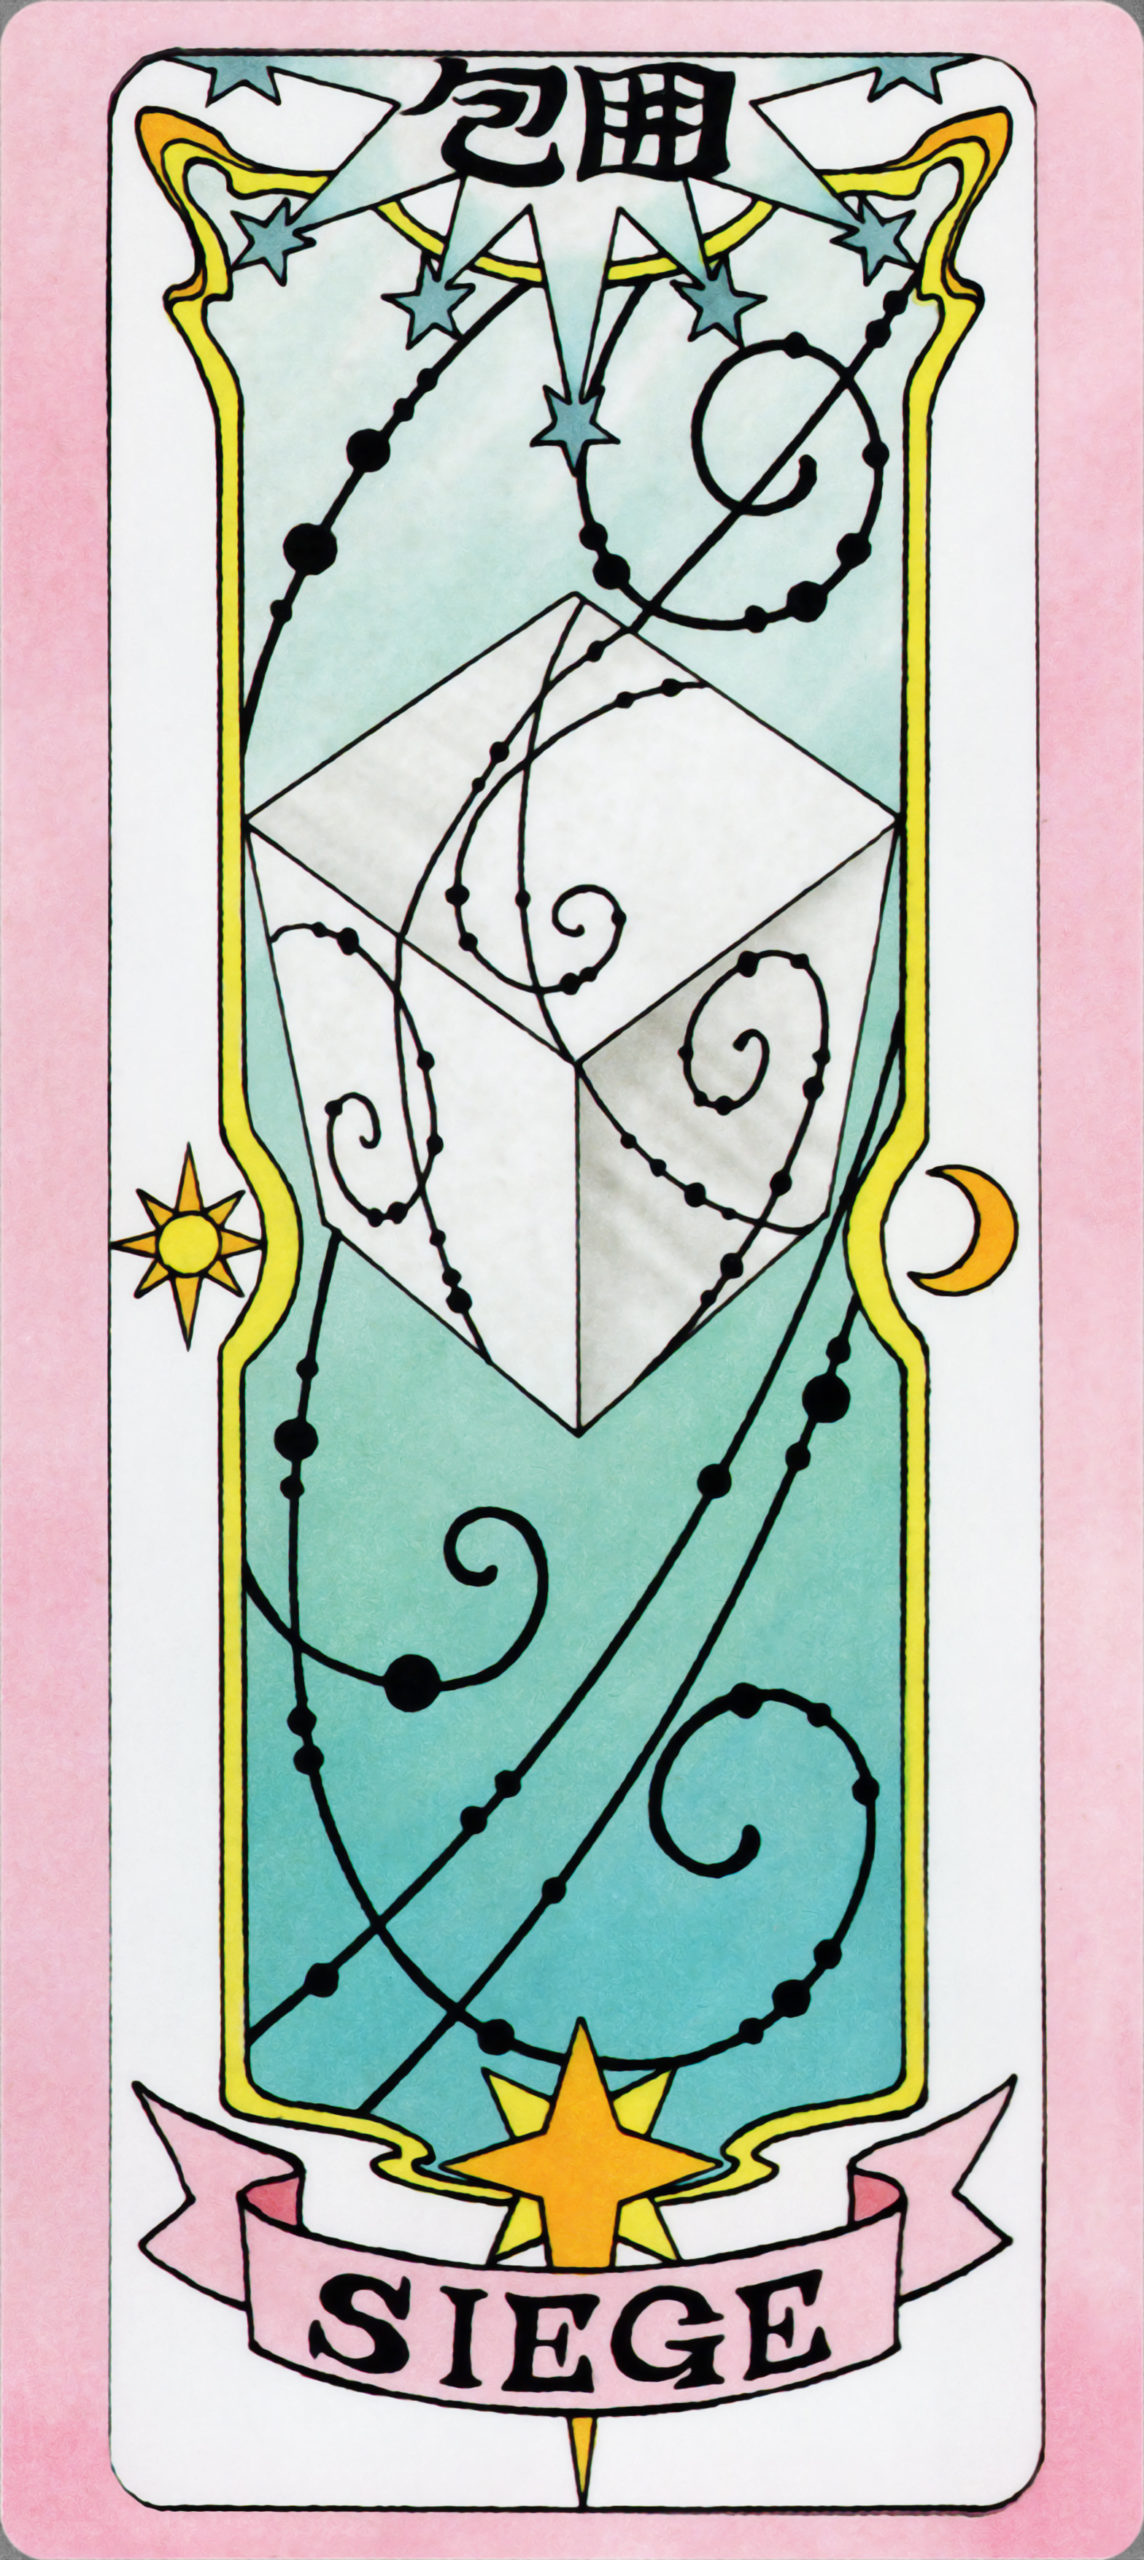 The Siege Clear Card. (Image: CLAMP)